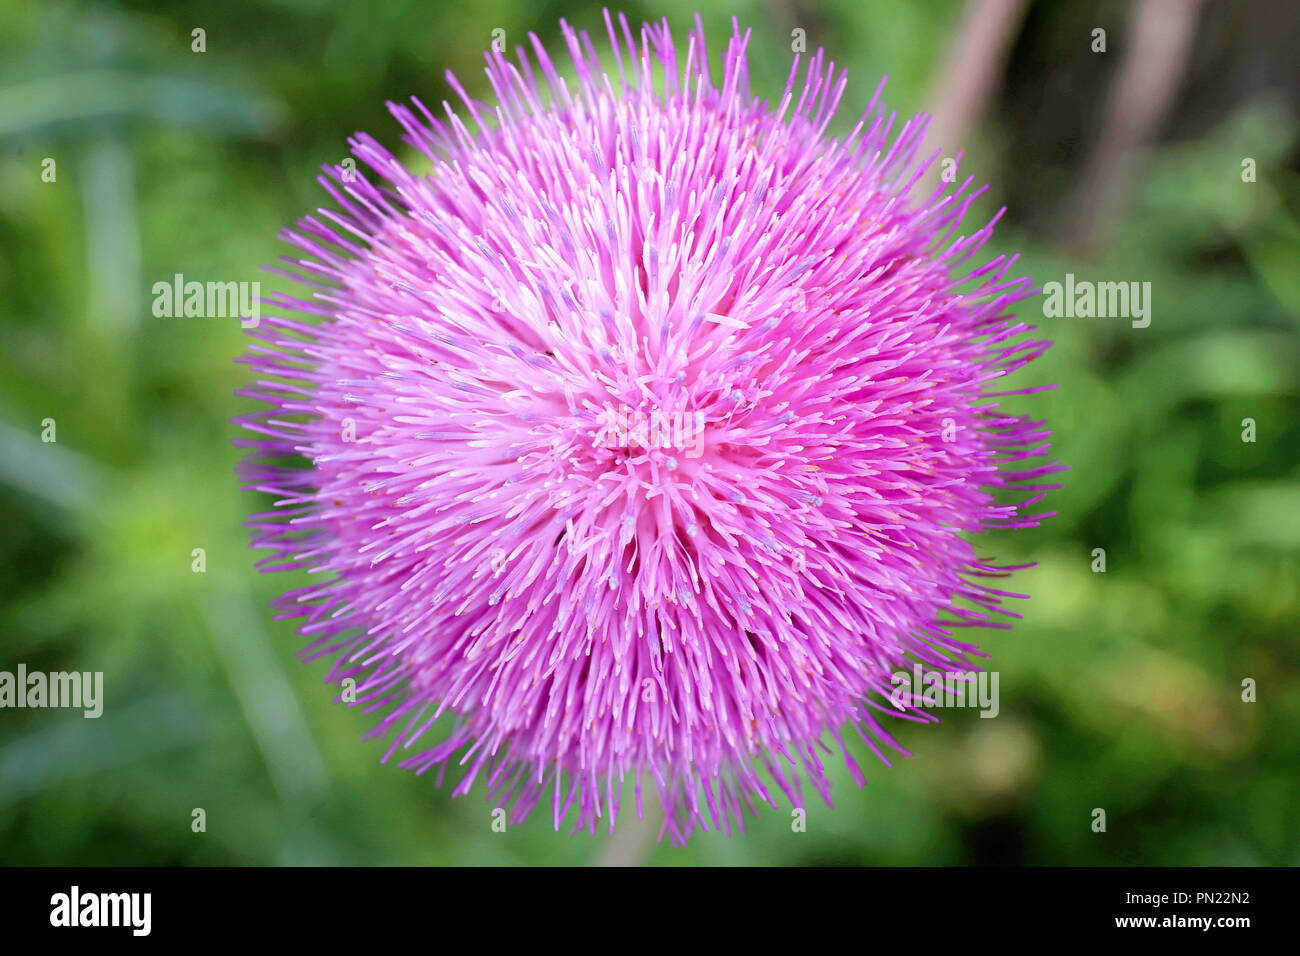 Close up Macro image of the pink flower blossom of a Milk Thistle Plant in nature. Stock Photo